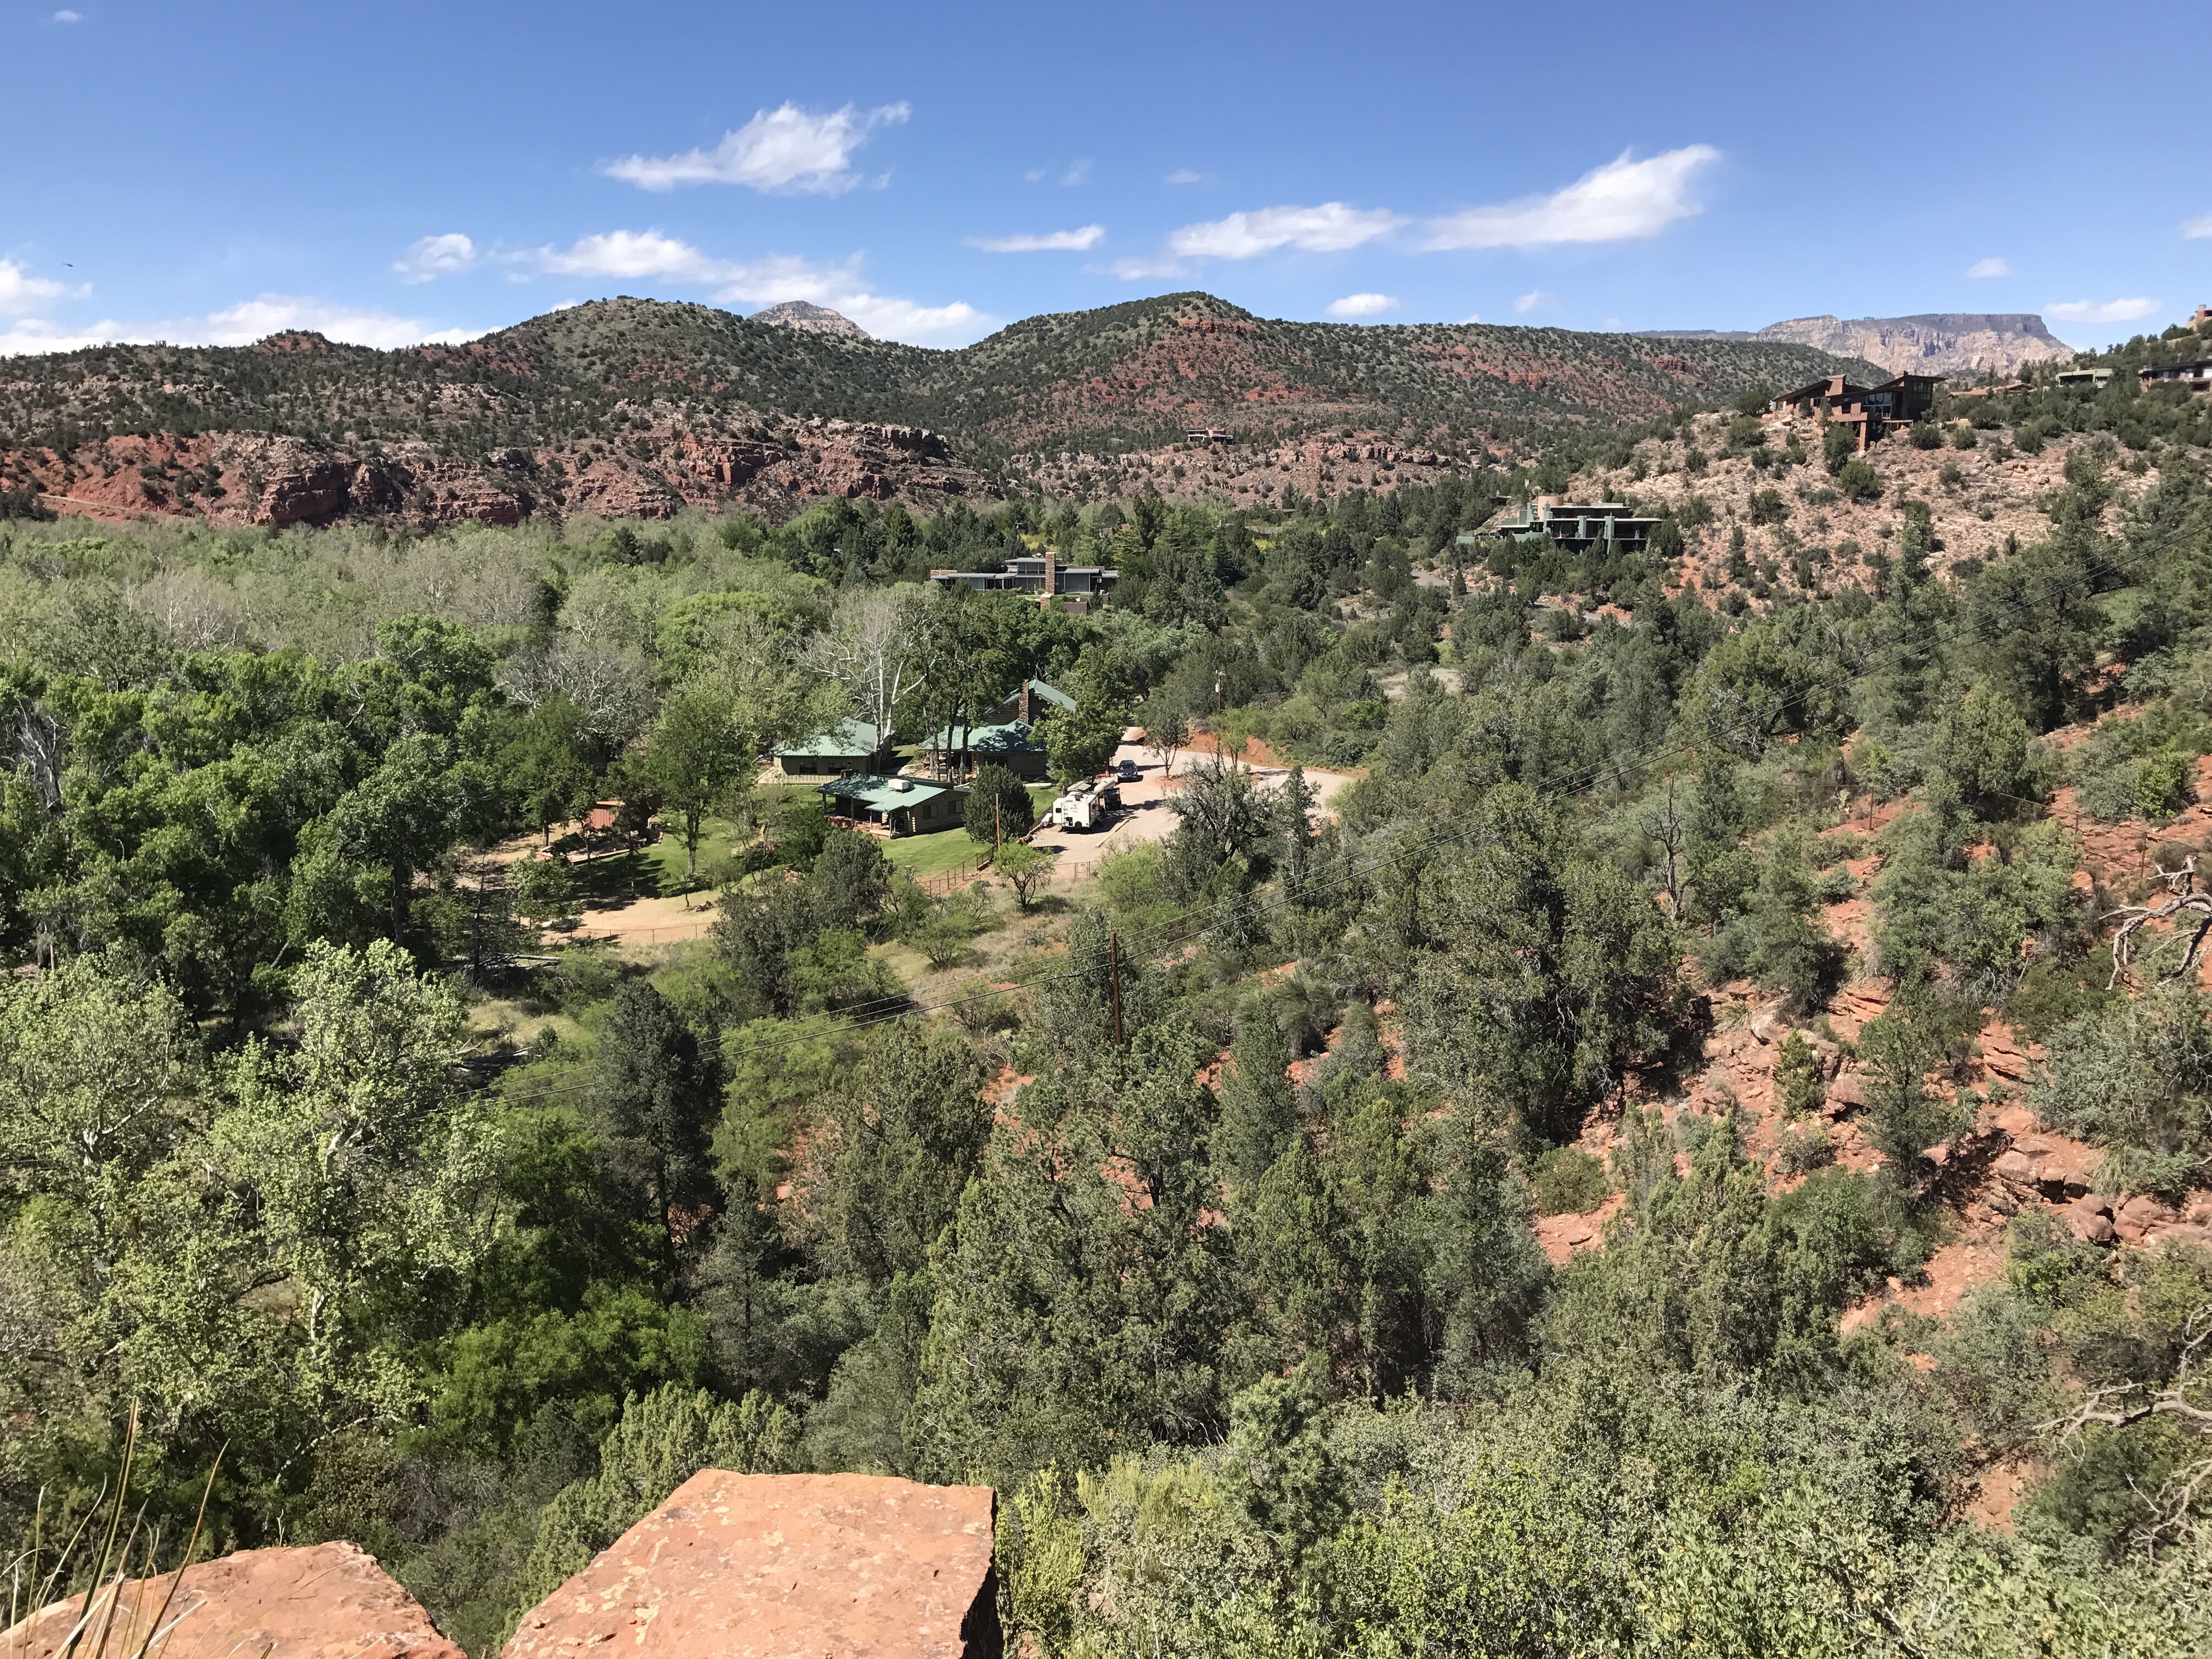 Along Templeton Trail are views of some very nice houses in the Sedona area. Sedona, AZ - 2017.04.28